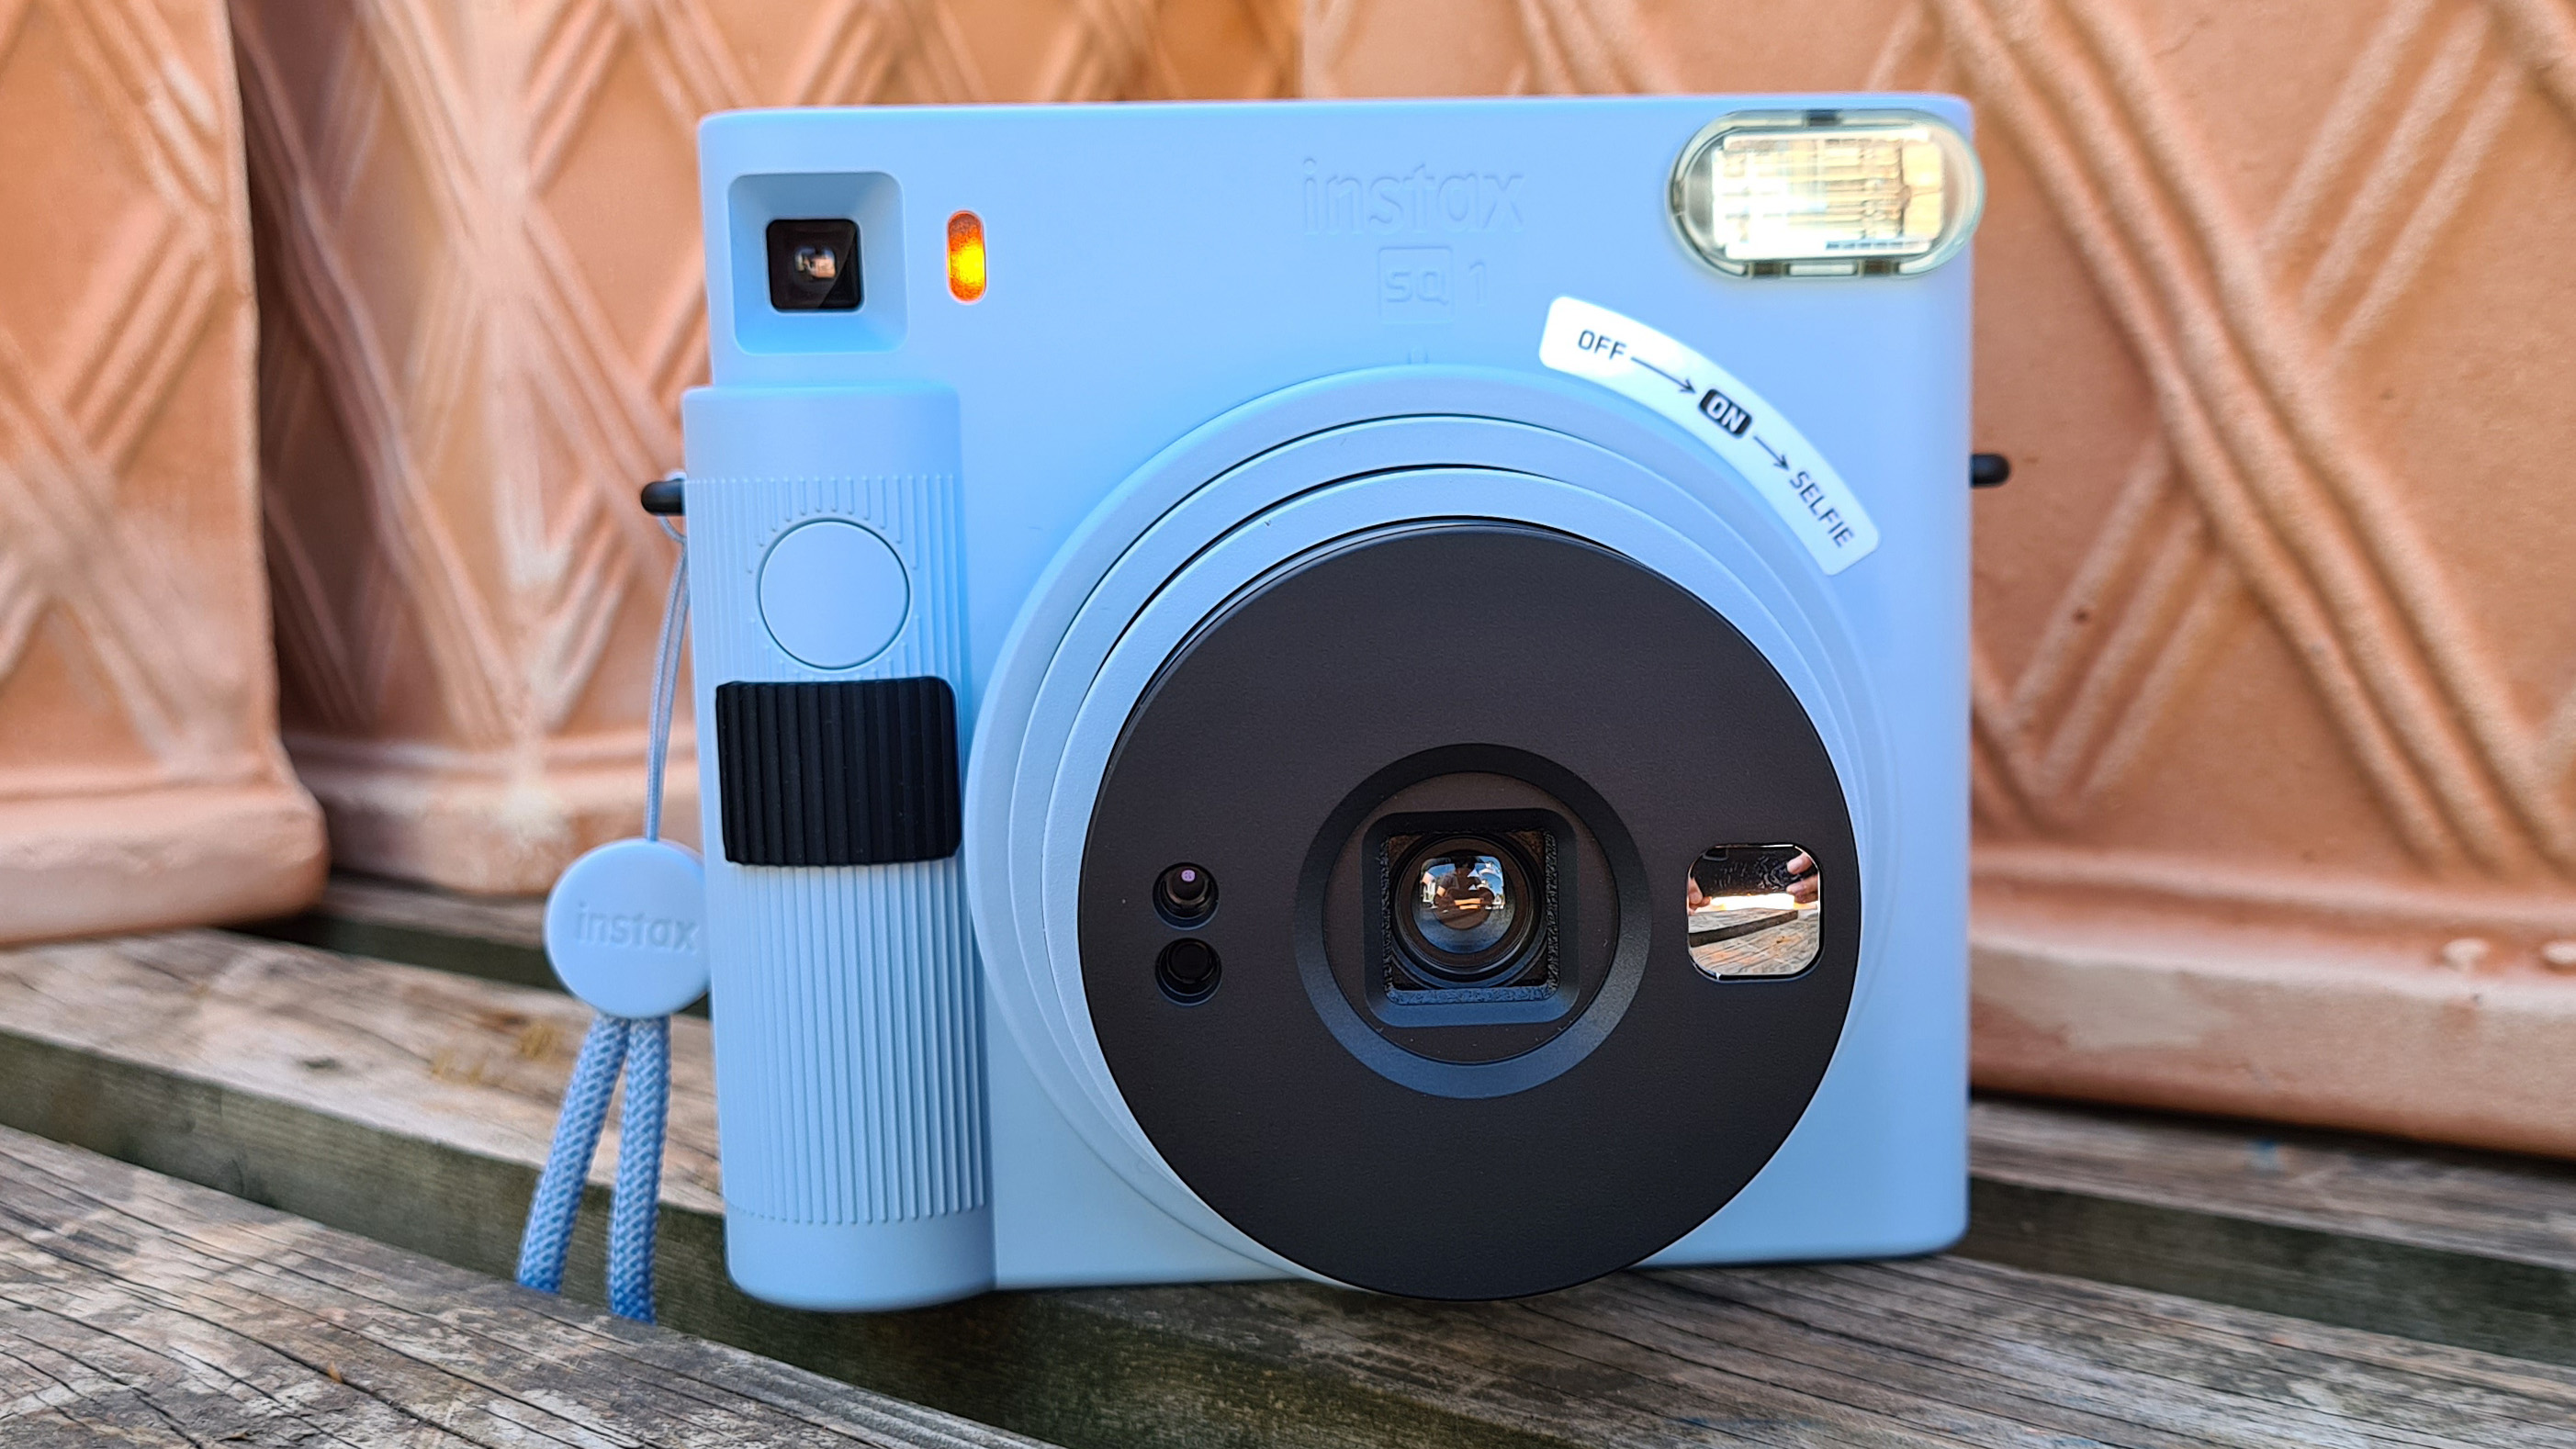 A Fujifilm Instax SQ1 instant camera placed on a wooden bench